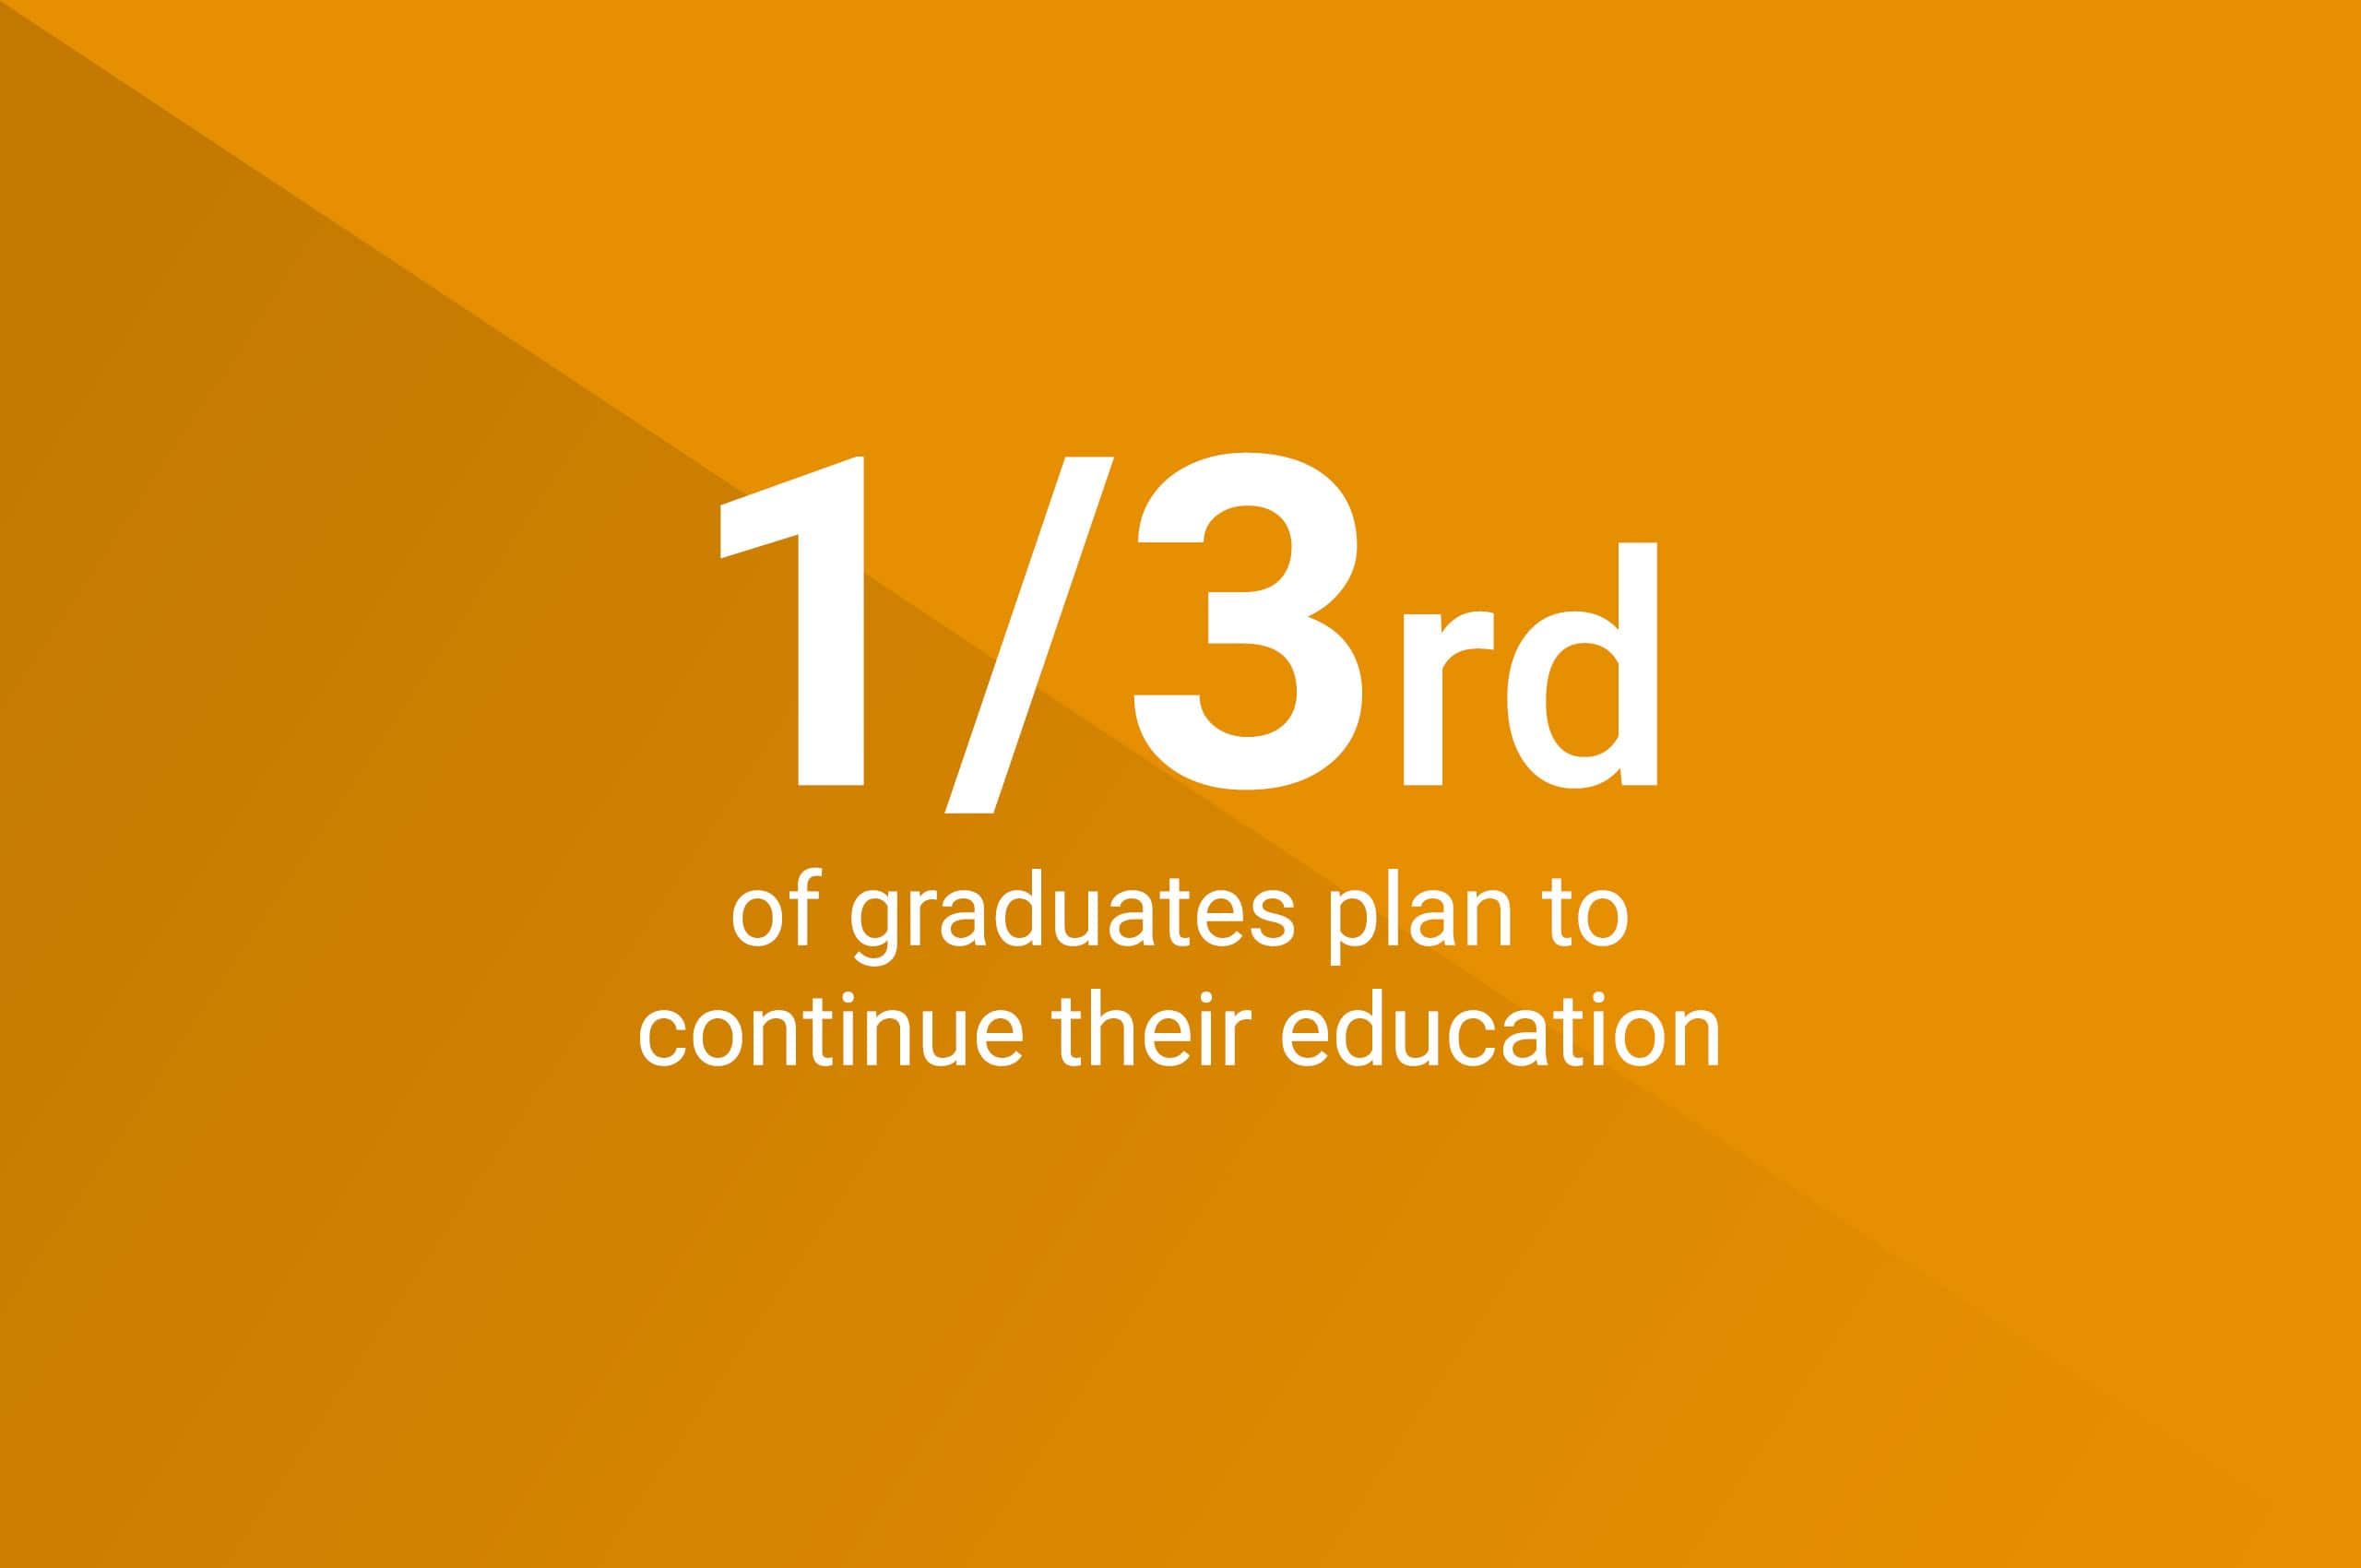 One third of graduates plan to continue their education